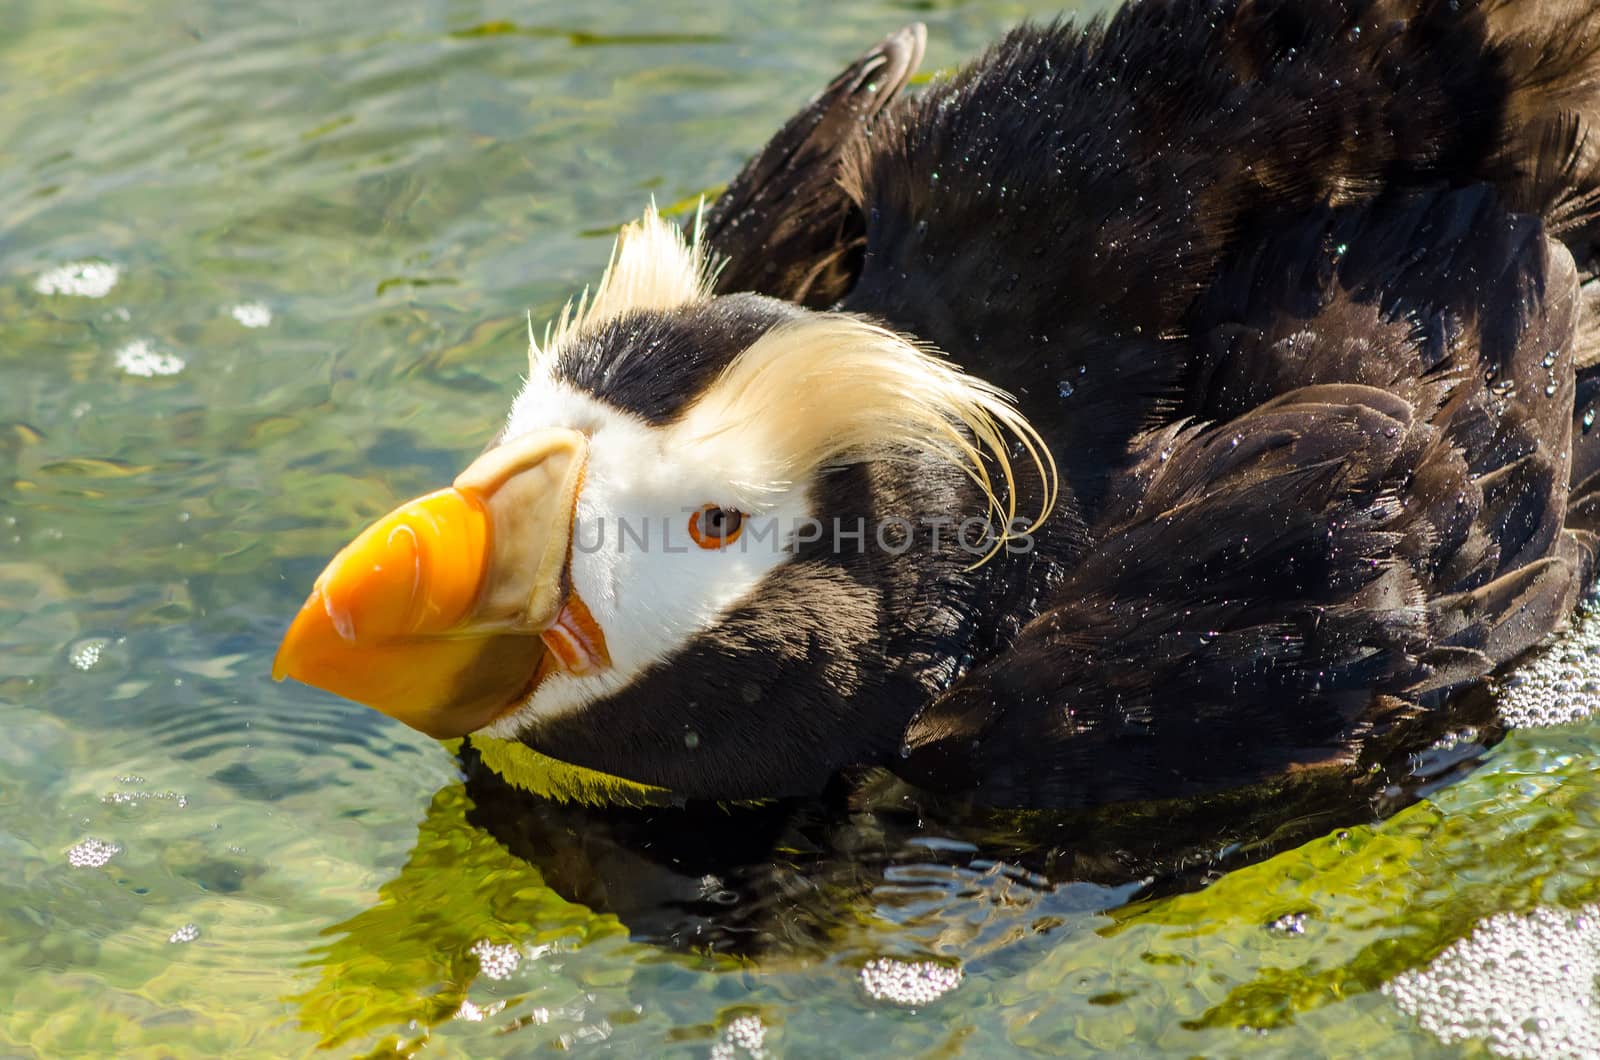 Tufted Puffin Closeup by jkraft5